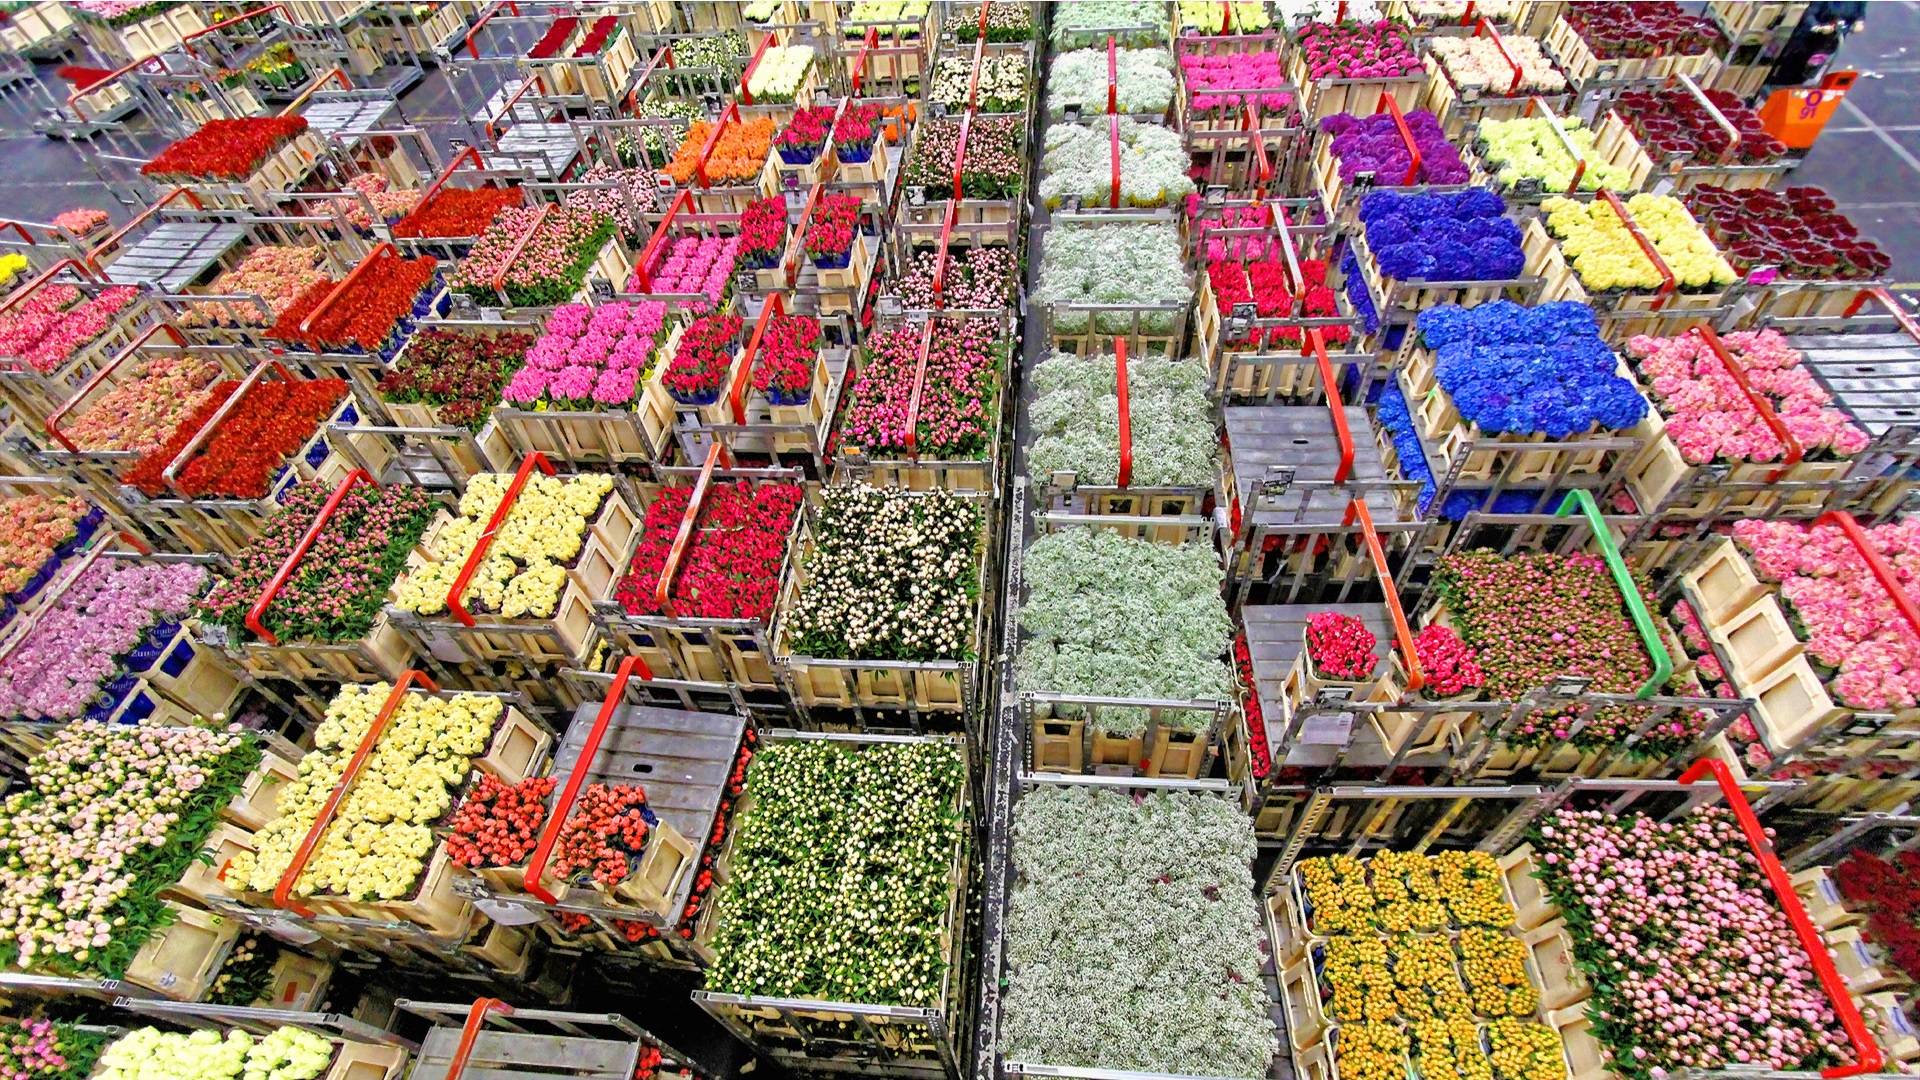 Flowers Aalsmeer auction (1)_HDR